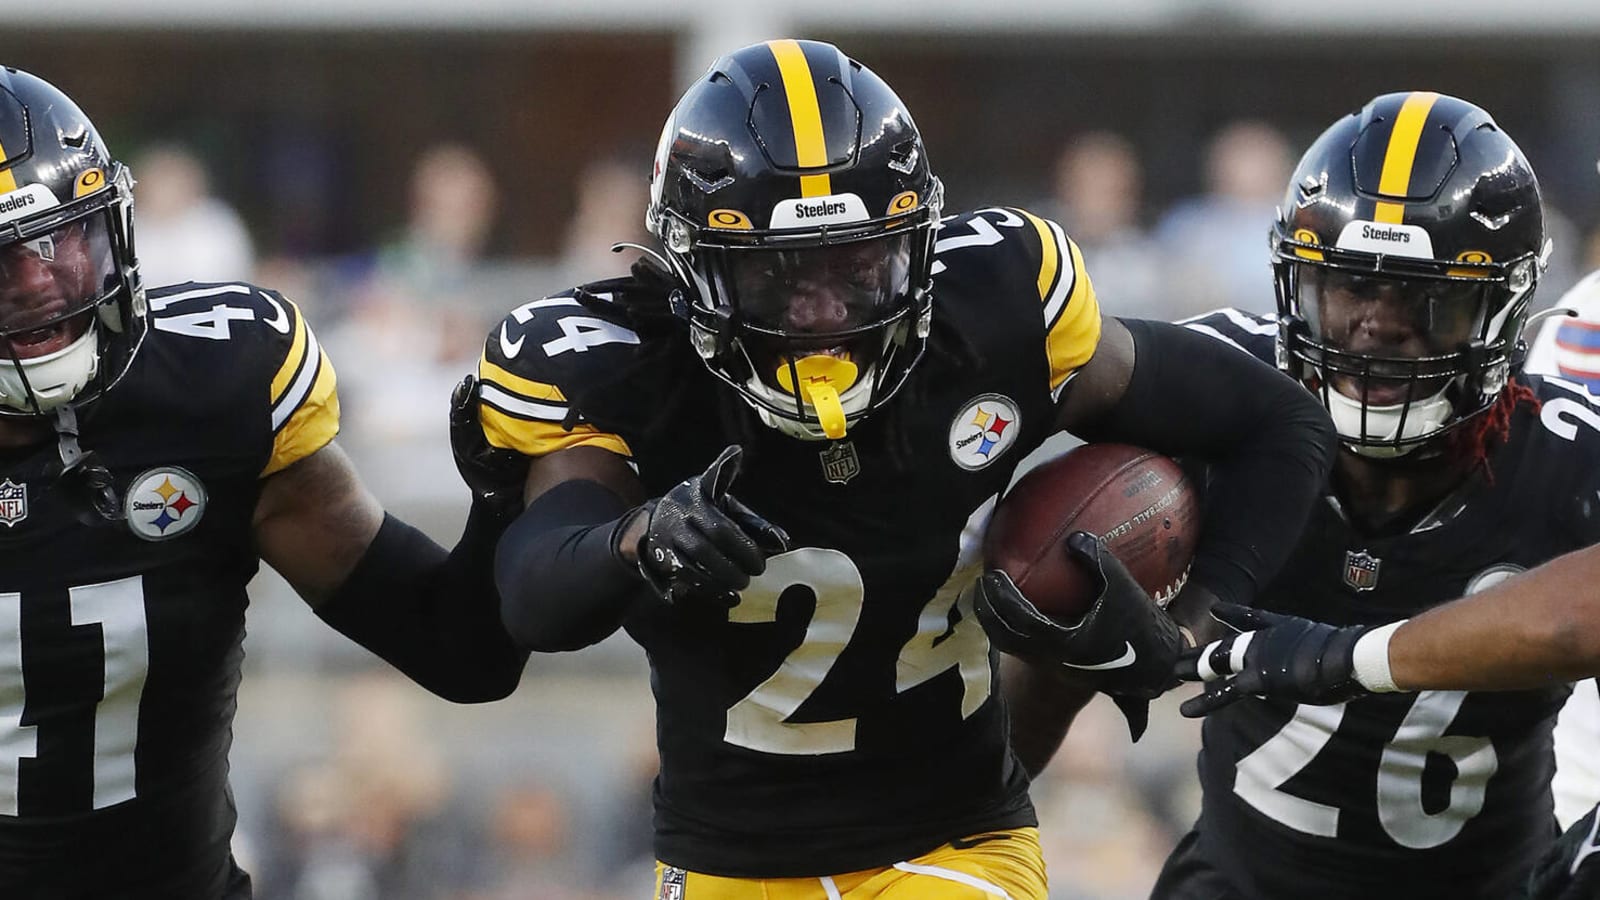 Steelers must continue growing role of promising rookie